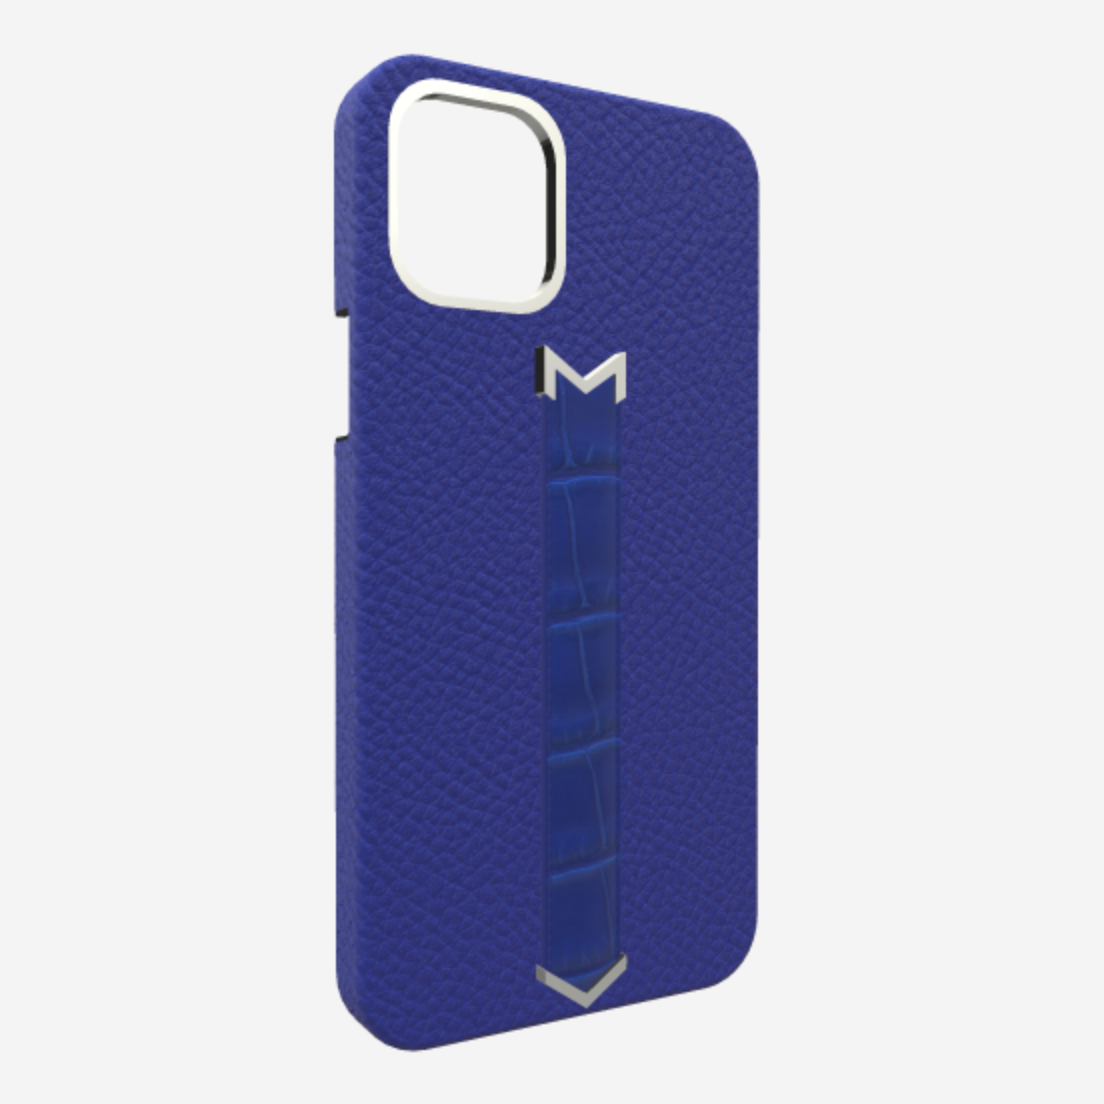 Silver Finger Strap Case for iPhone 13 in Genuine Calfskin and Alligator Electric-Blue Electric-Blue 